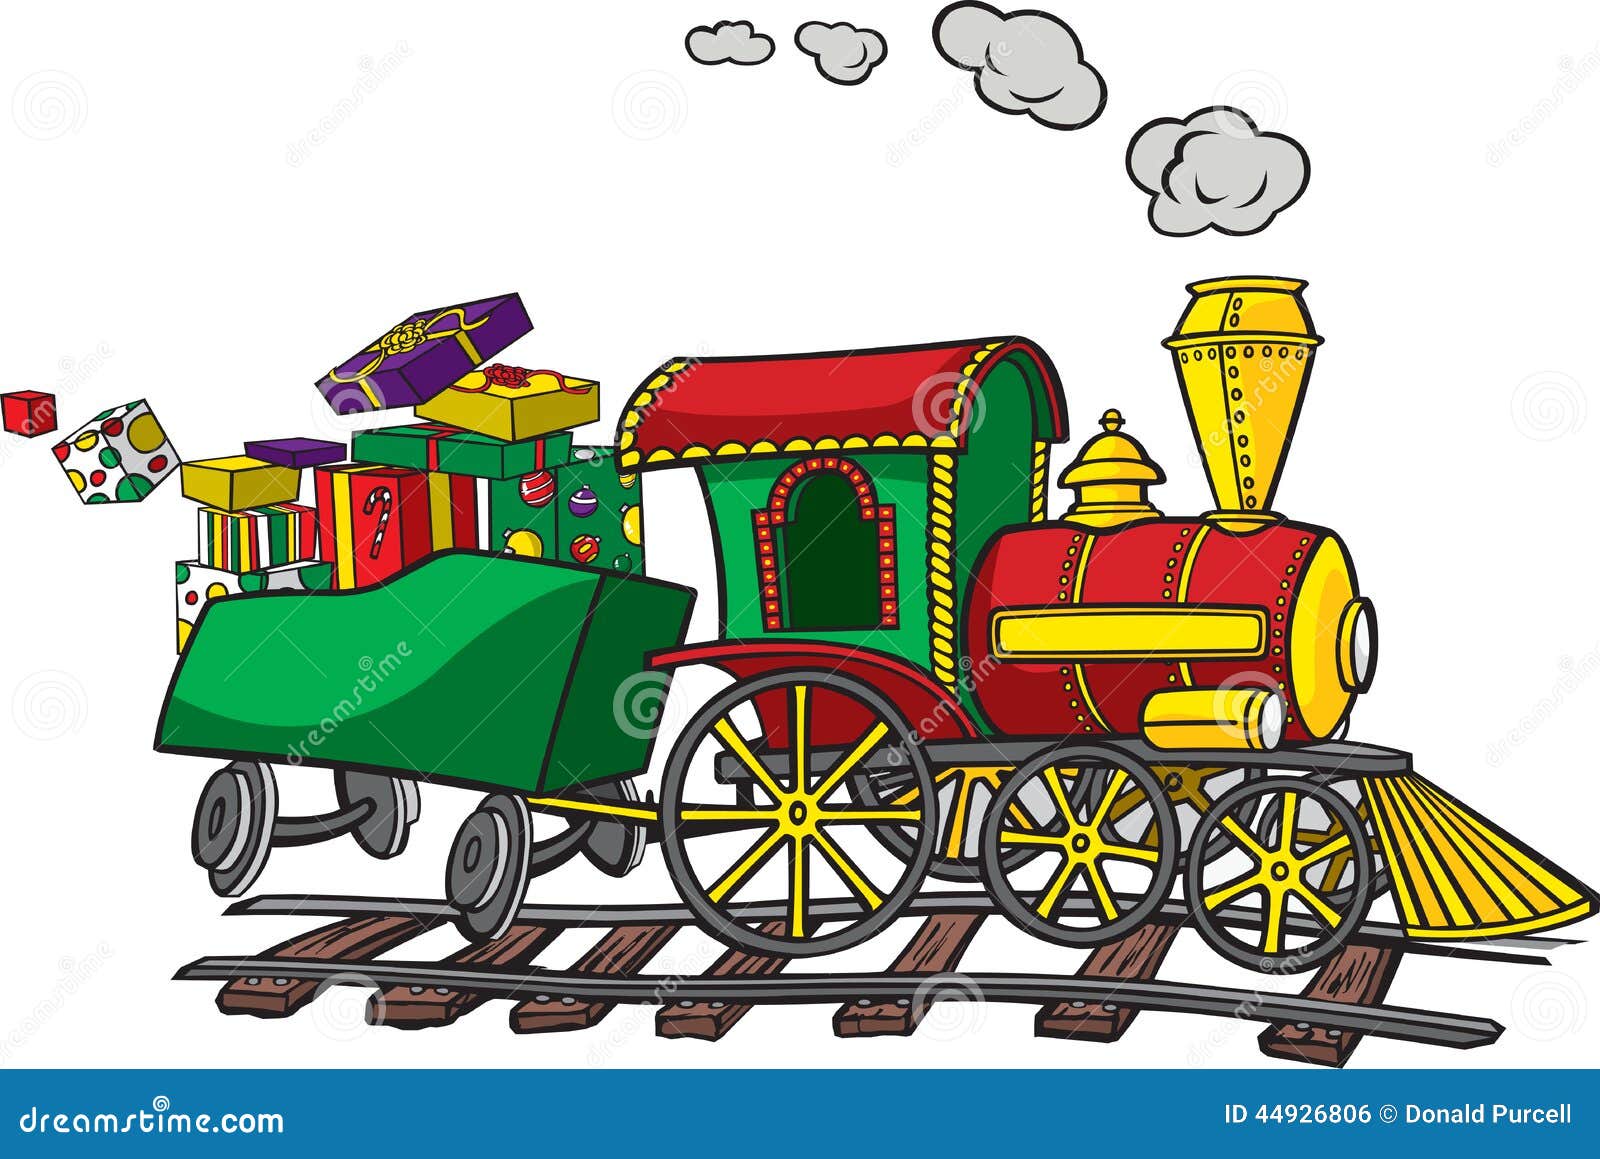 Cartoon Train Track Stock Illustrations 3 109 Cartoon Train Track Stock Illustrations Vectors Clipart Dreamstime Free for commercial use no attribution required high quality images. dreamstime com